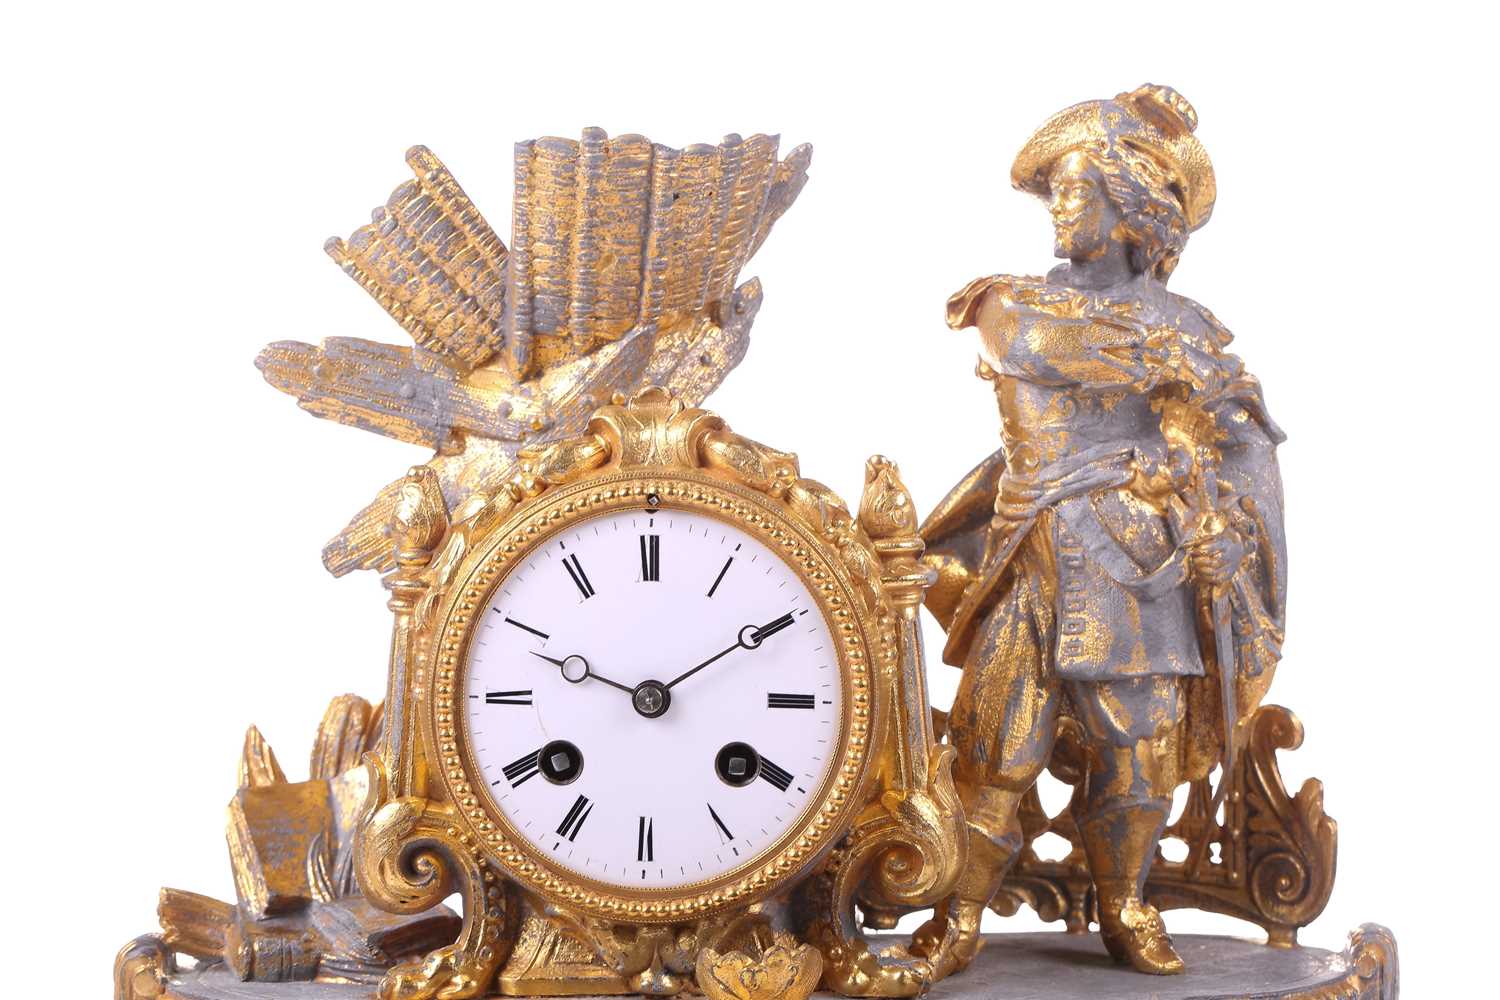 A late 19th century French parcel gilt spelter clock, depicting a nobleman standing beside a drum - Image 14 of 14